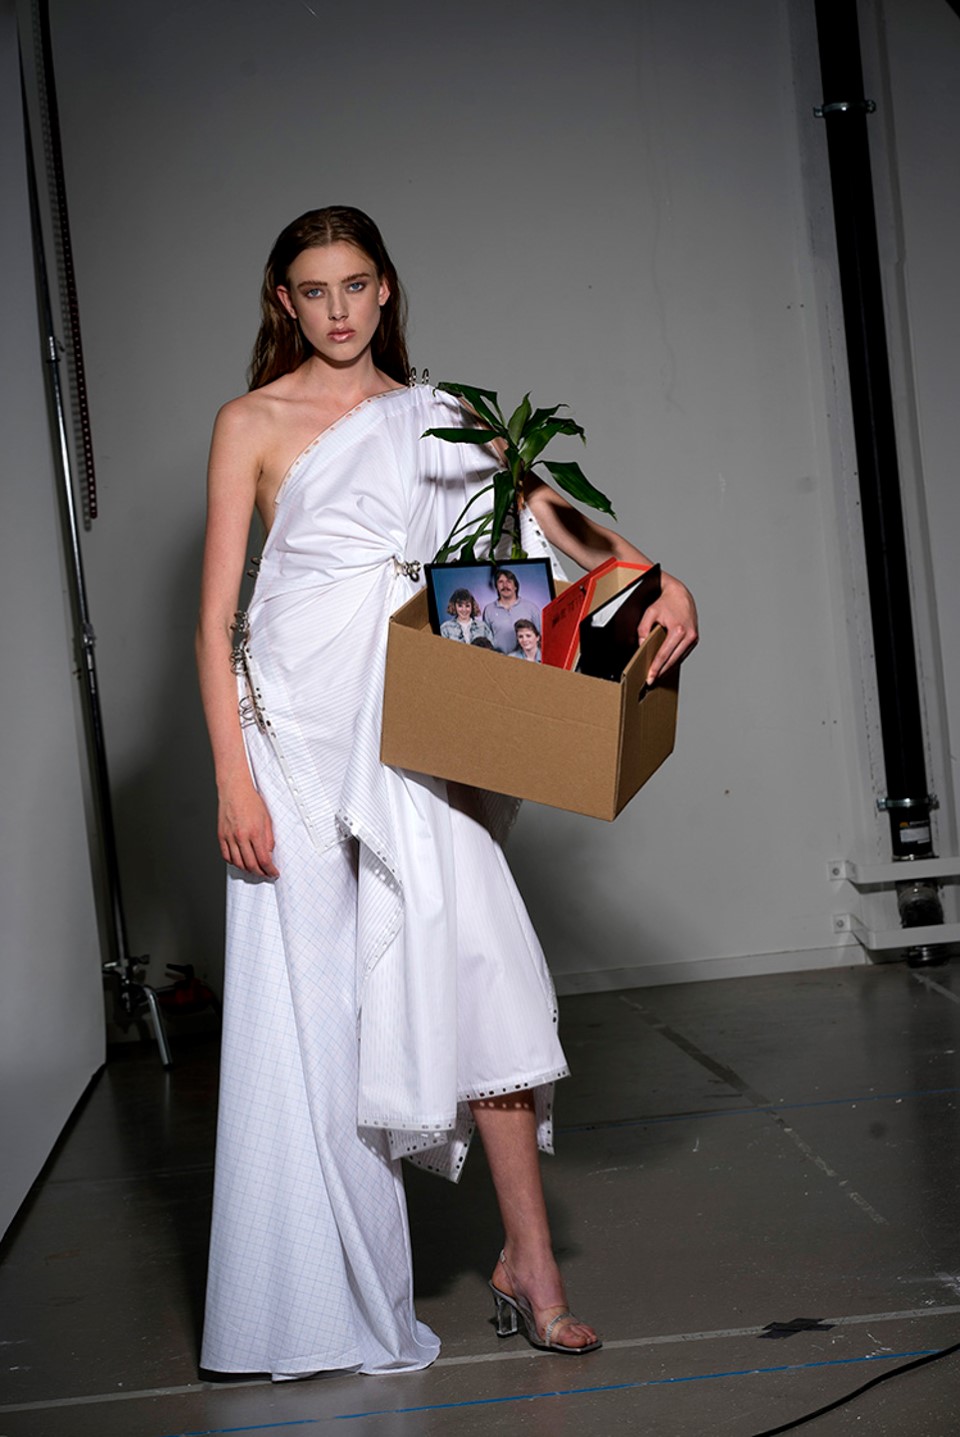 Image of collection by Kajsa Willumsen